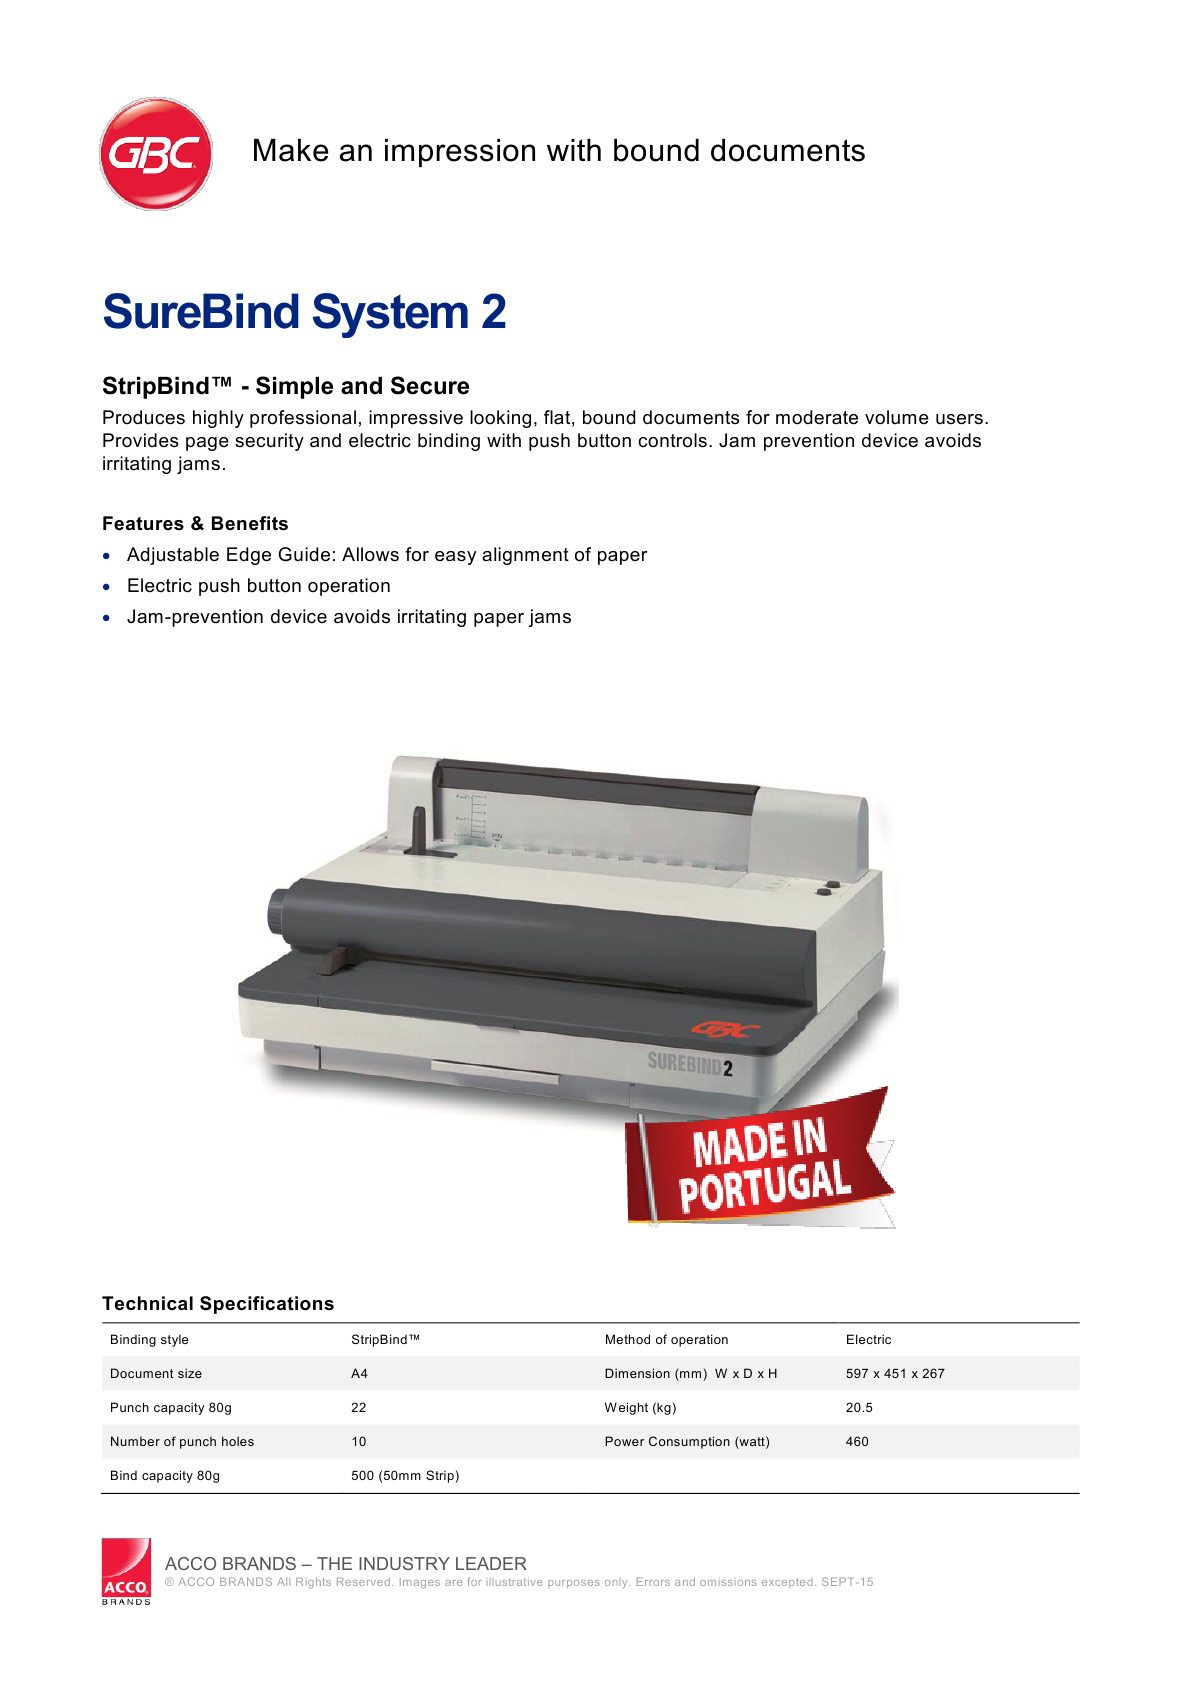 datasheet-surebind-sys2..<p><strong>Price: $23,980.00</strong> </p>]]></description>
			<content:encoded><![CDATA[<h1><span style=